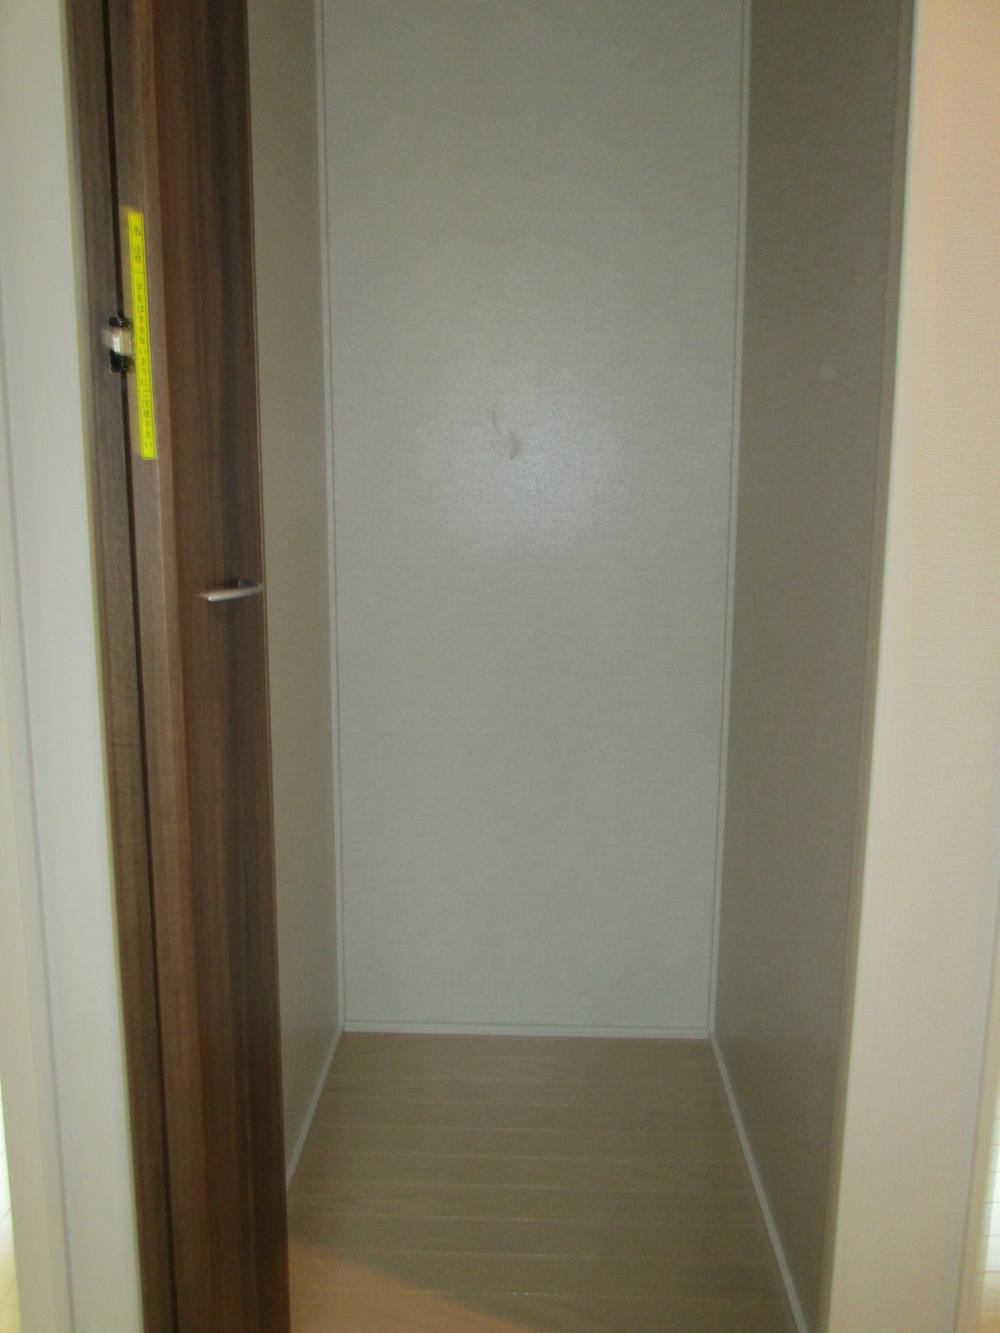 Other introspection. Closet can be a lot of storage there is a depth